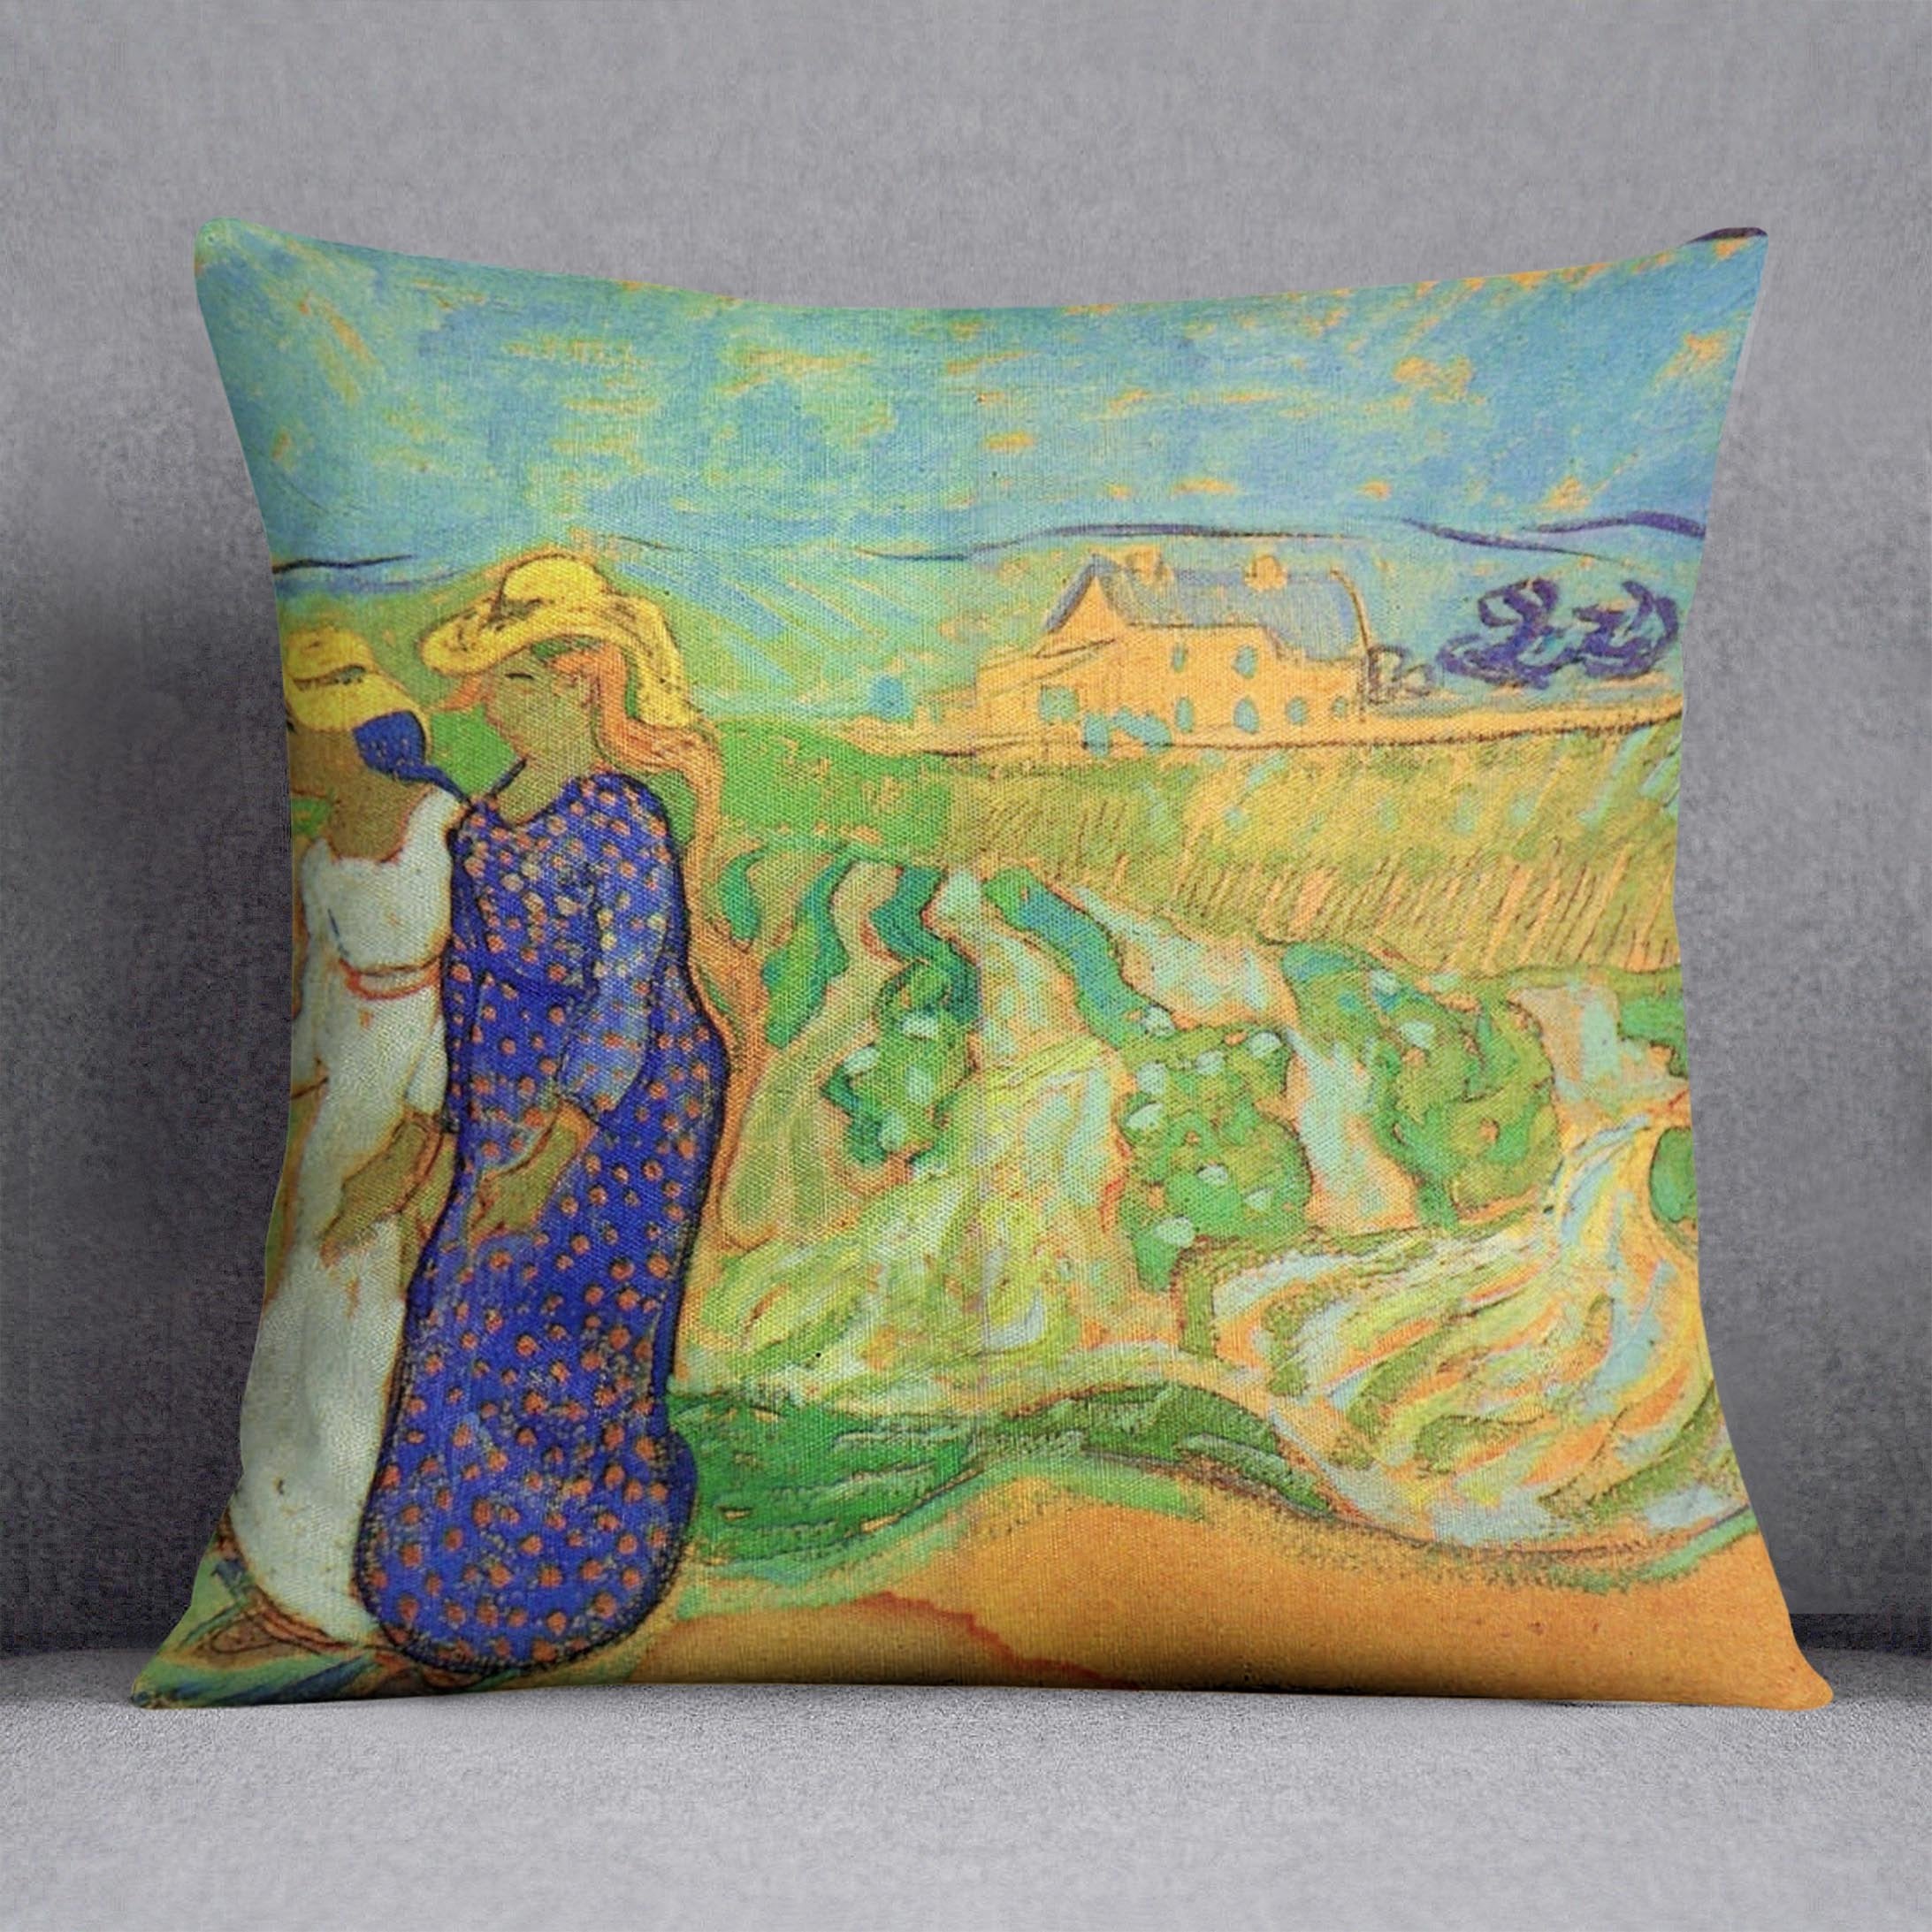 Two Women Crossing the Fields by Van Gogh Throw Pillow